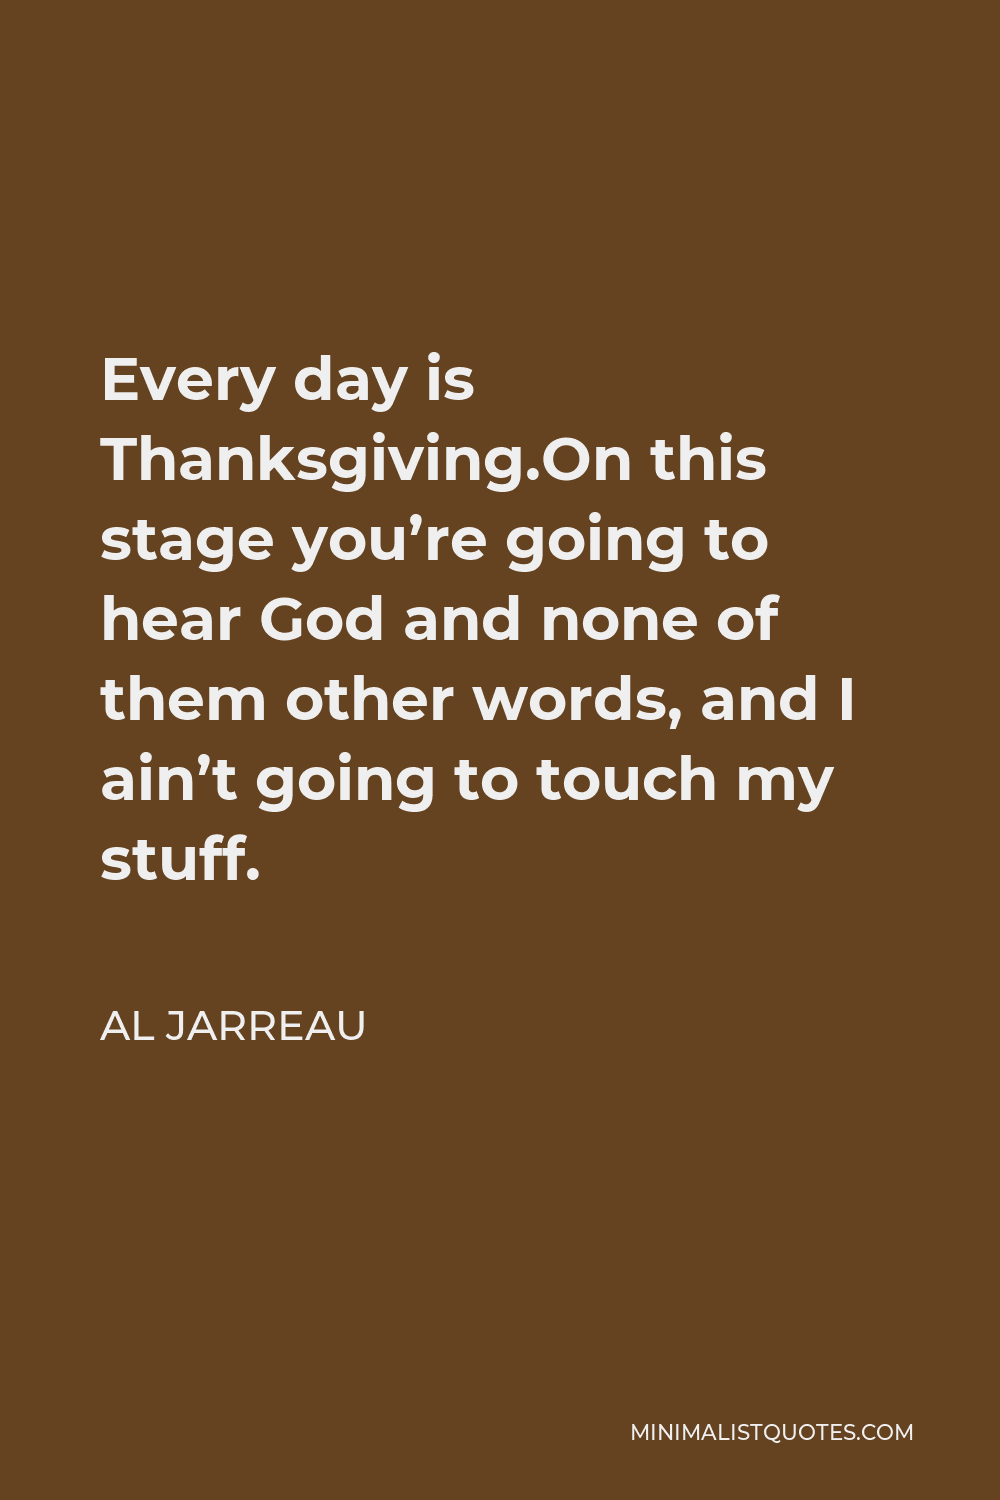 Al Jarreau Quote - Every day is Thanksgiving.On this stage you’re going to hear God and none of them other words, and I ain’t going to touch my stuff.